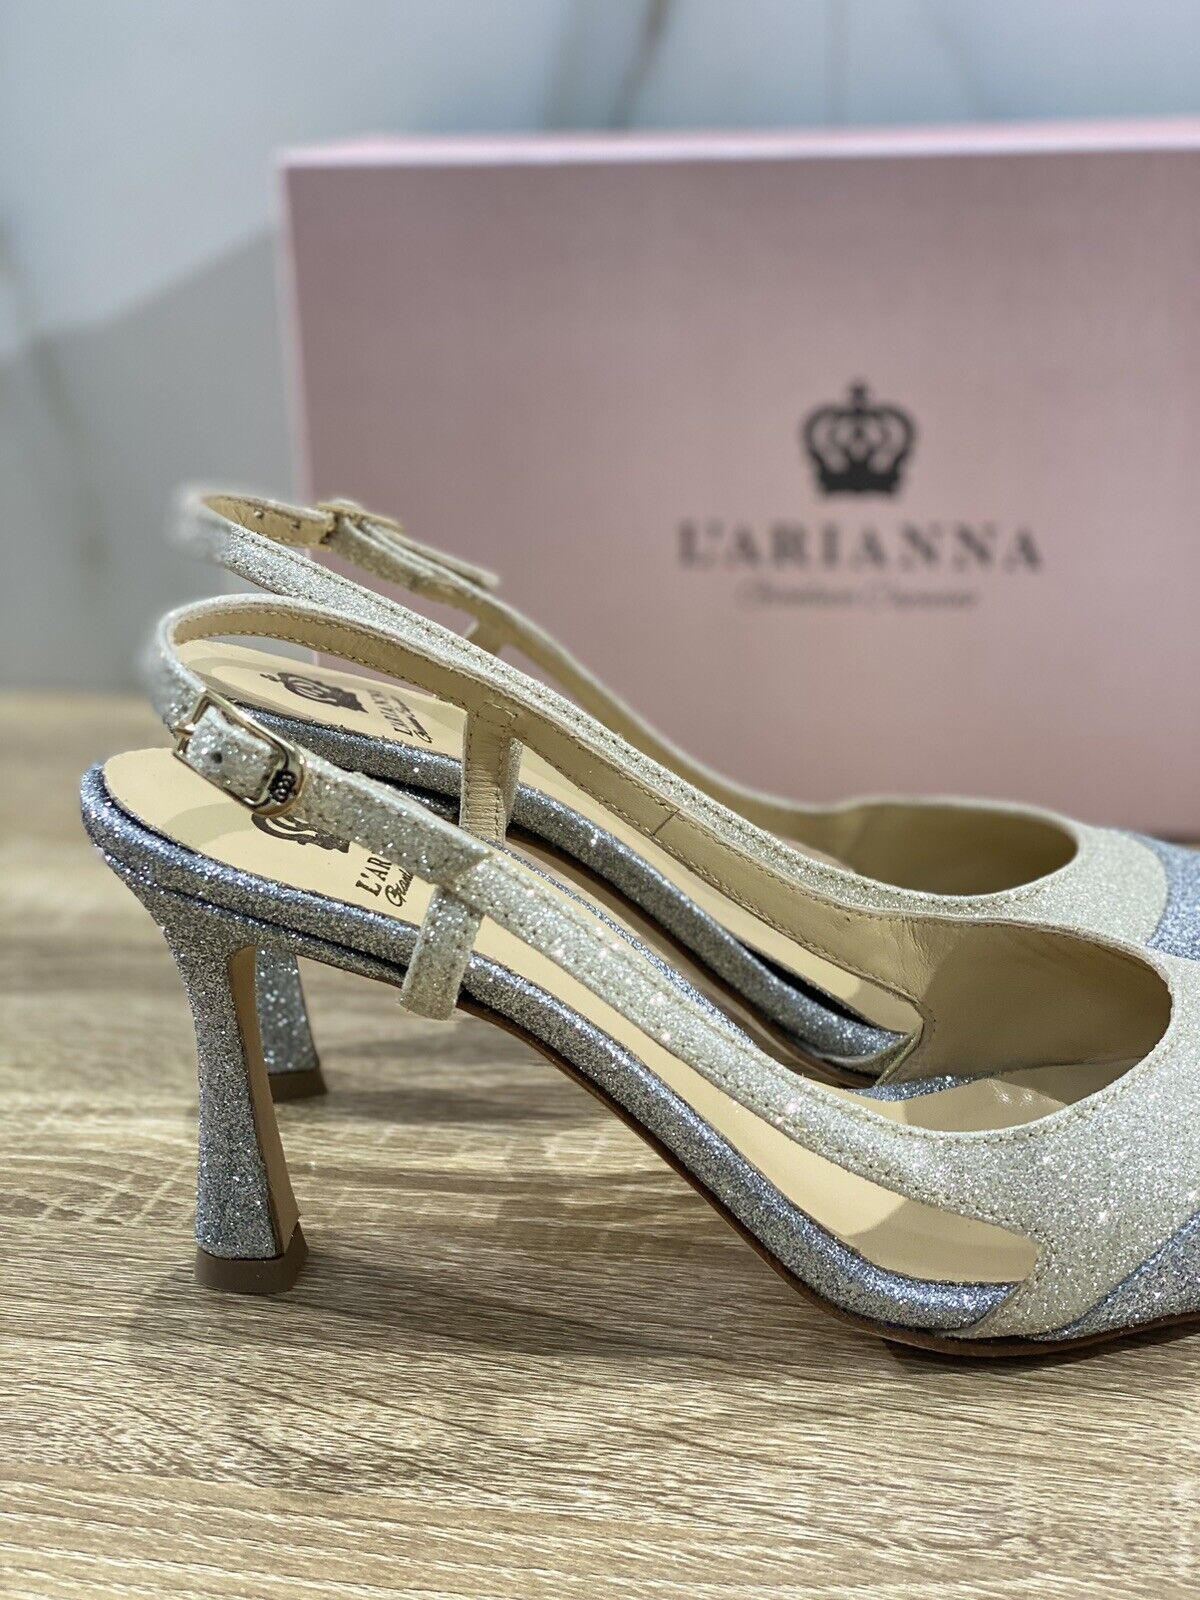 L’ARIANNA Sling Back Donna Luxury Argento Con Tacco 40